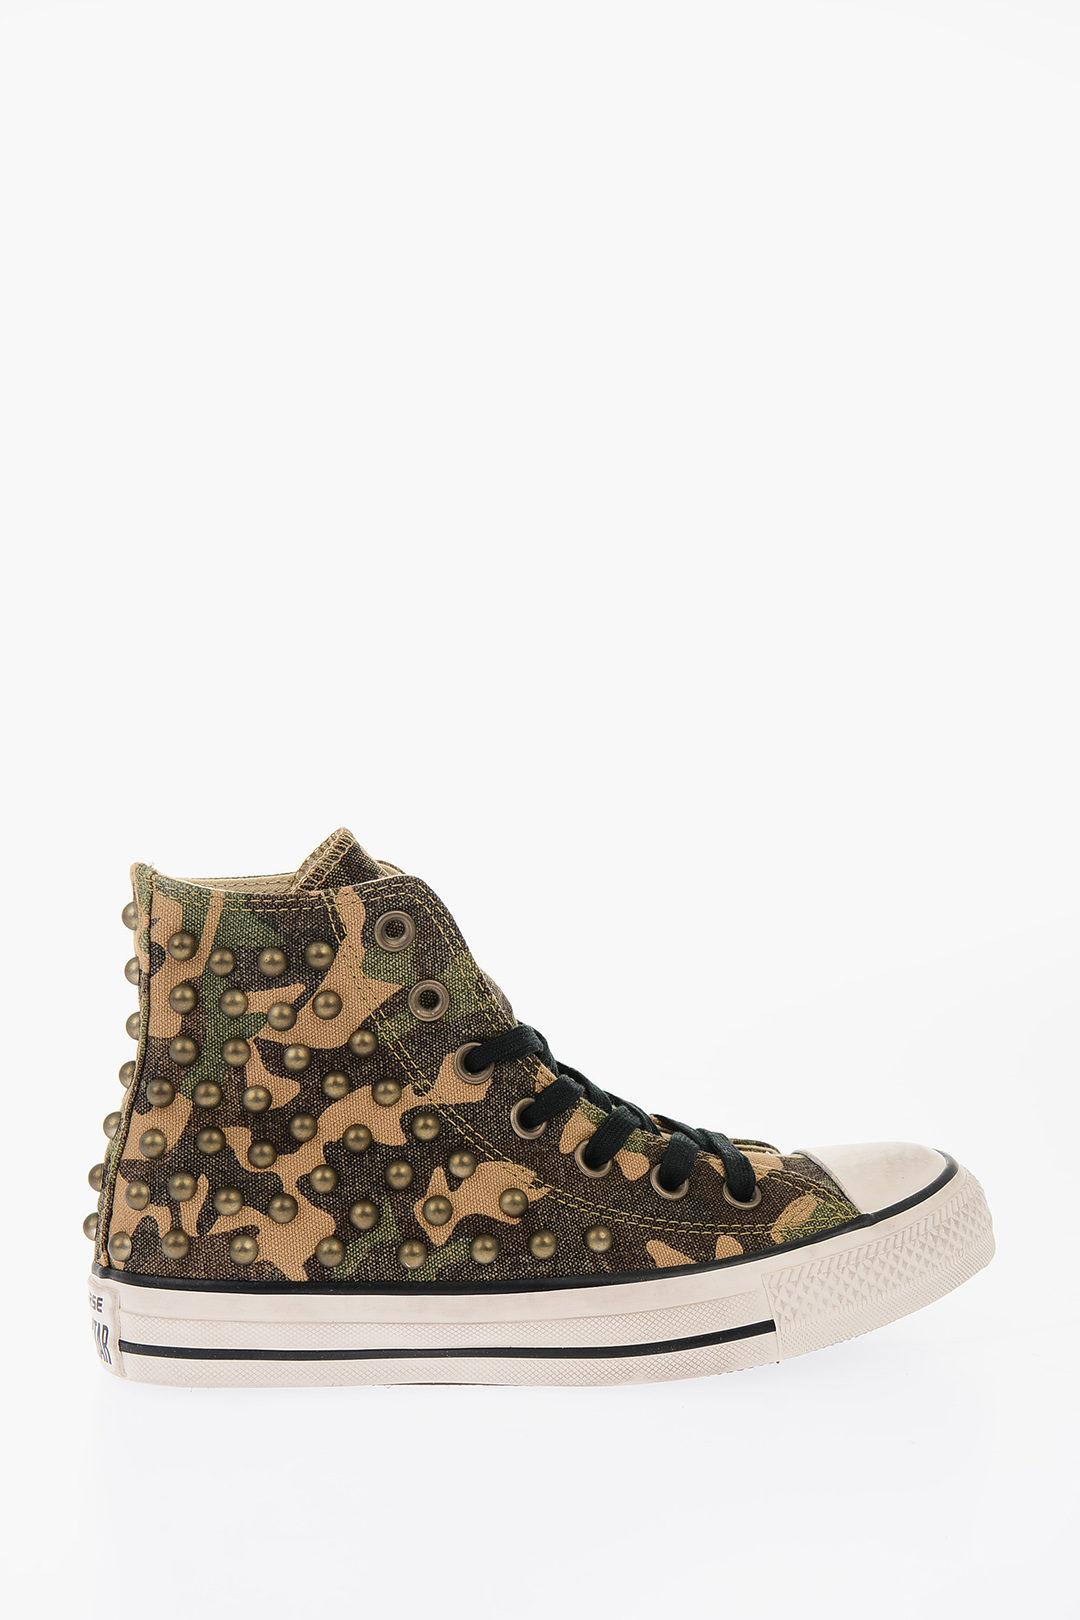 Converse ALL STAR Studded Camouflage High-top Sneakers men - Glamood Outlet